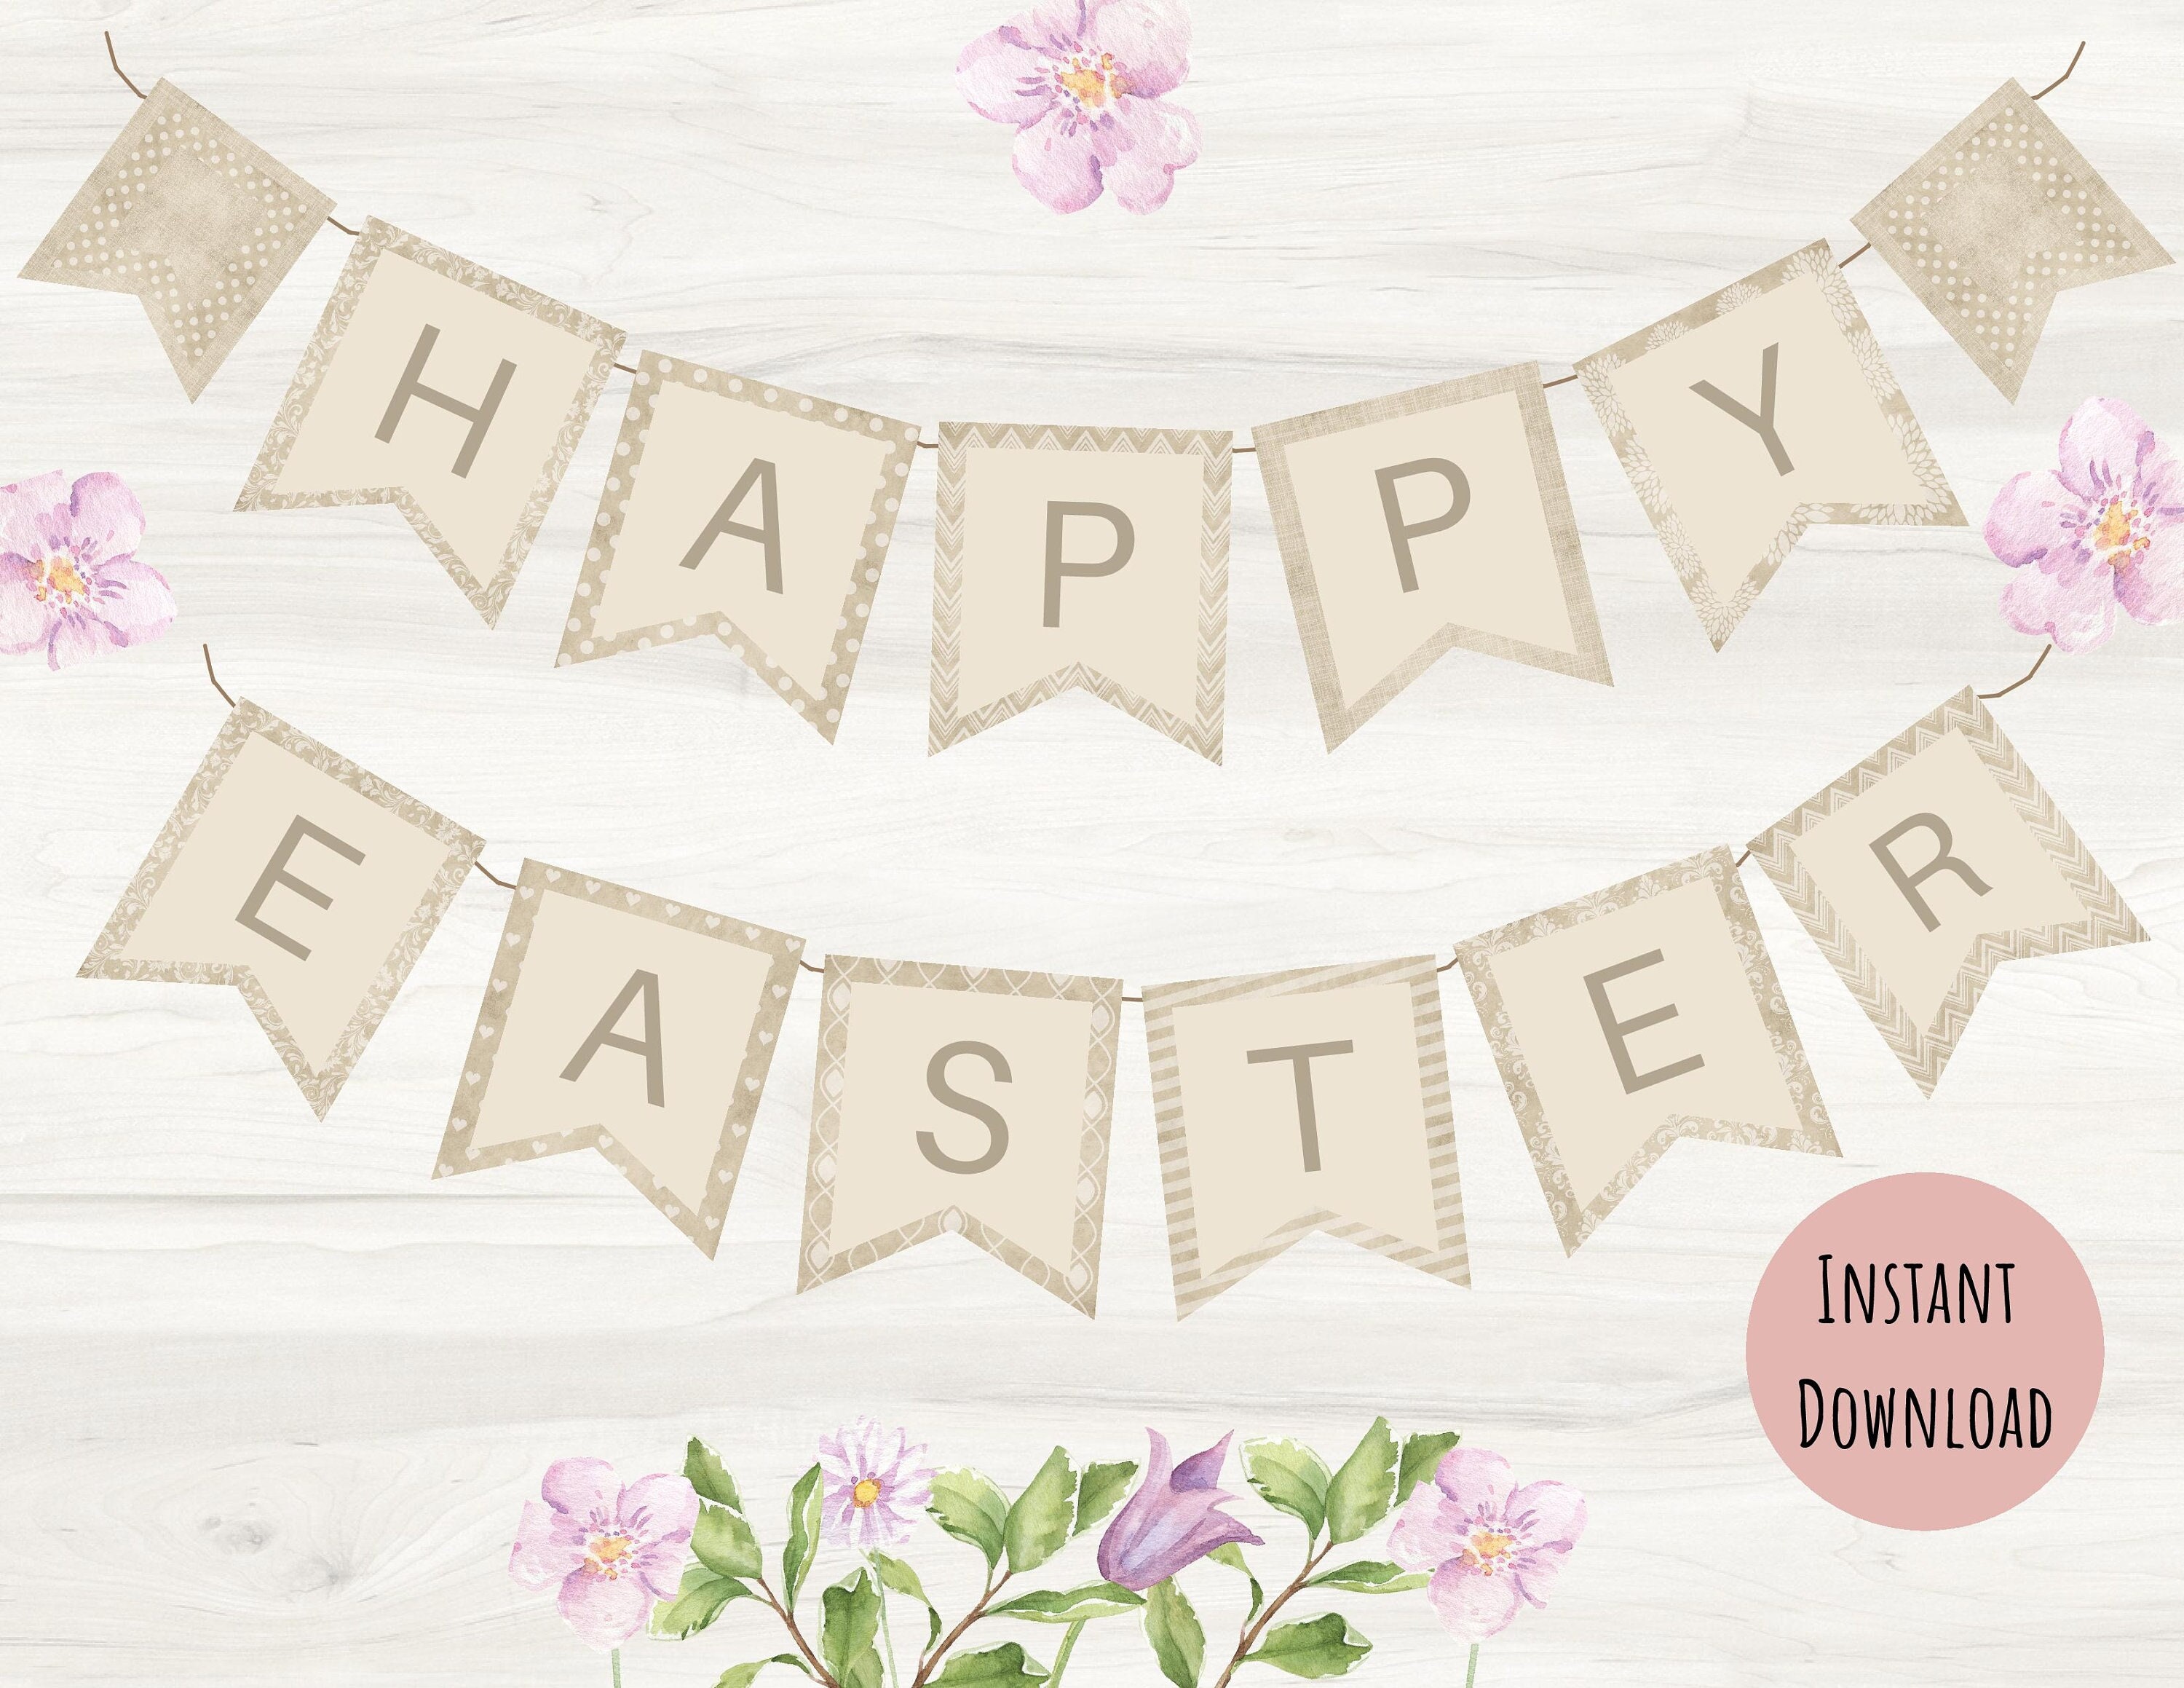 LUOEM Easter Banner Happy Easter Bunting Banners HE IS RISEN and Cross Printed Burlap Banners Easter Party Decorations 